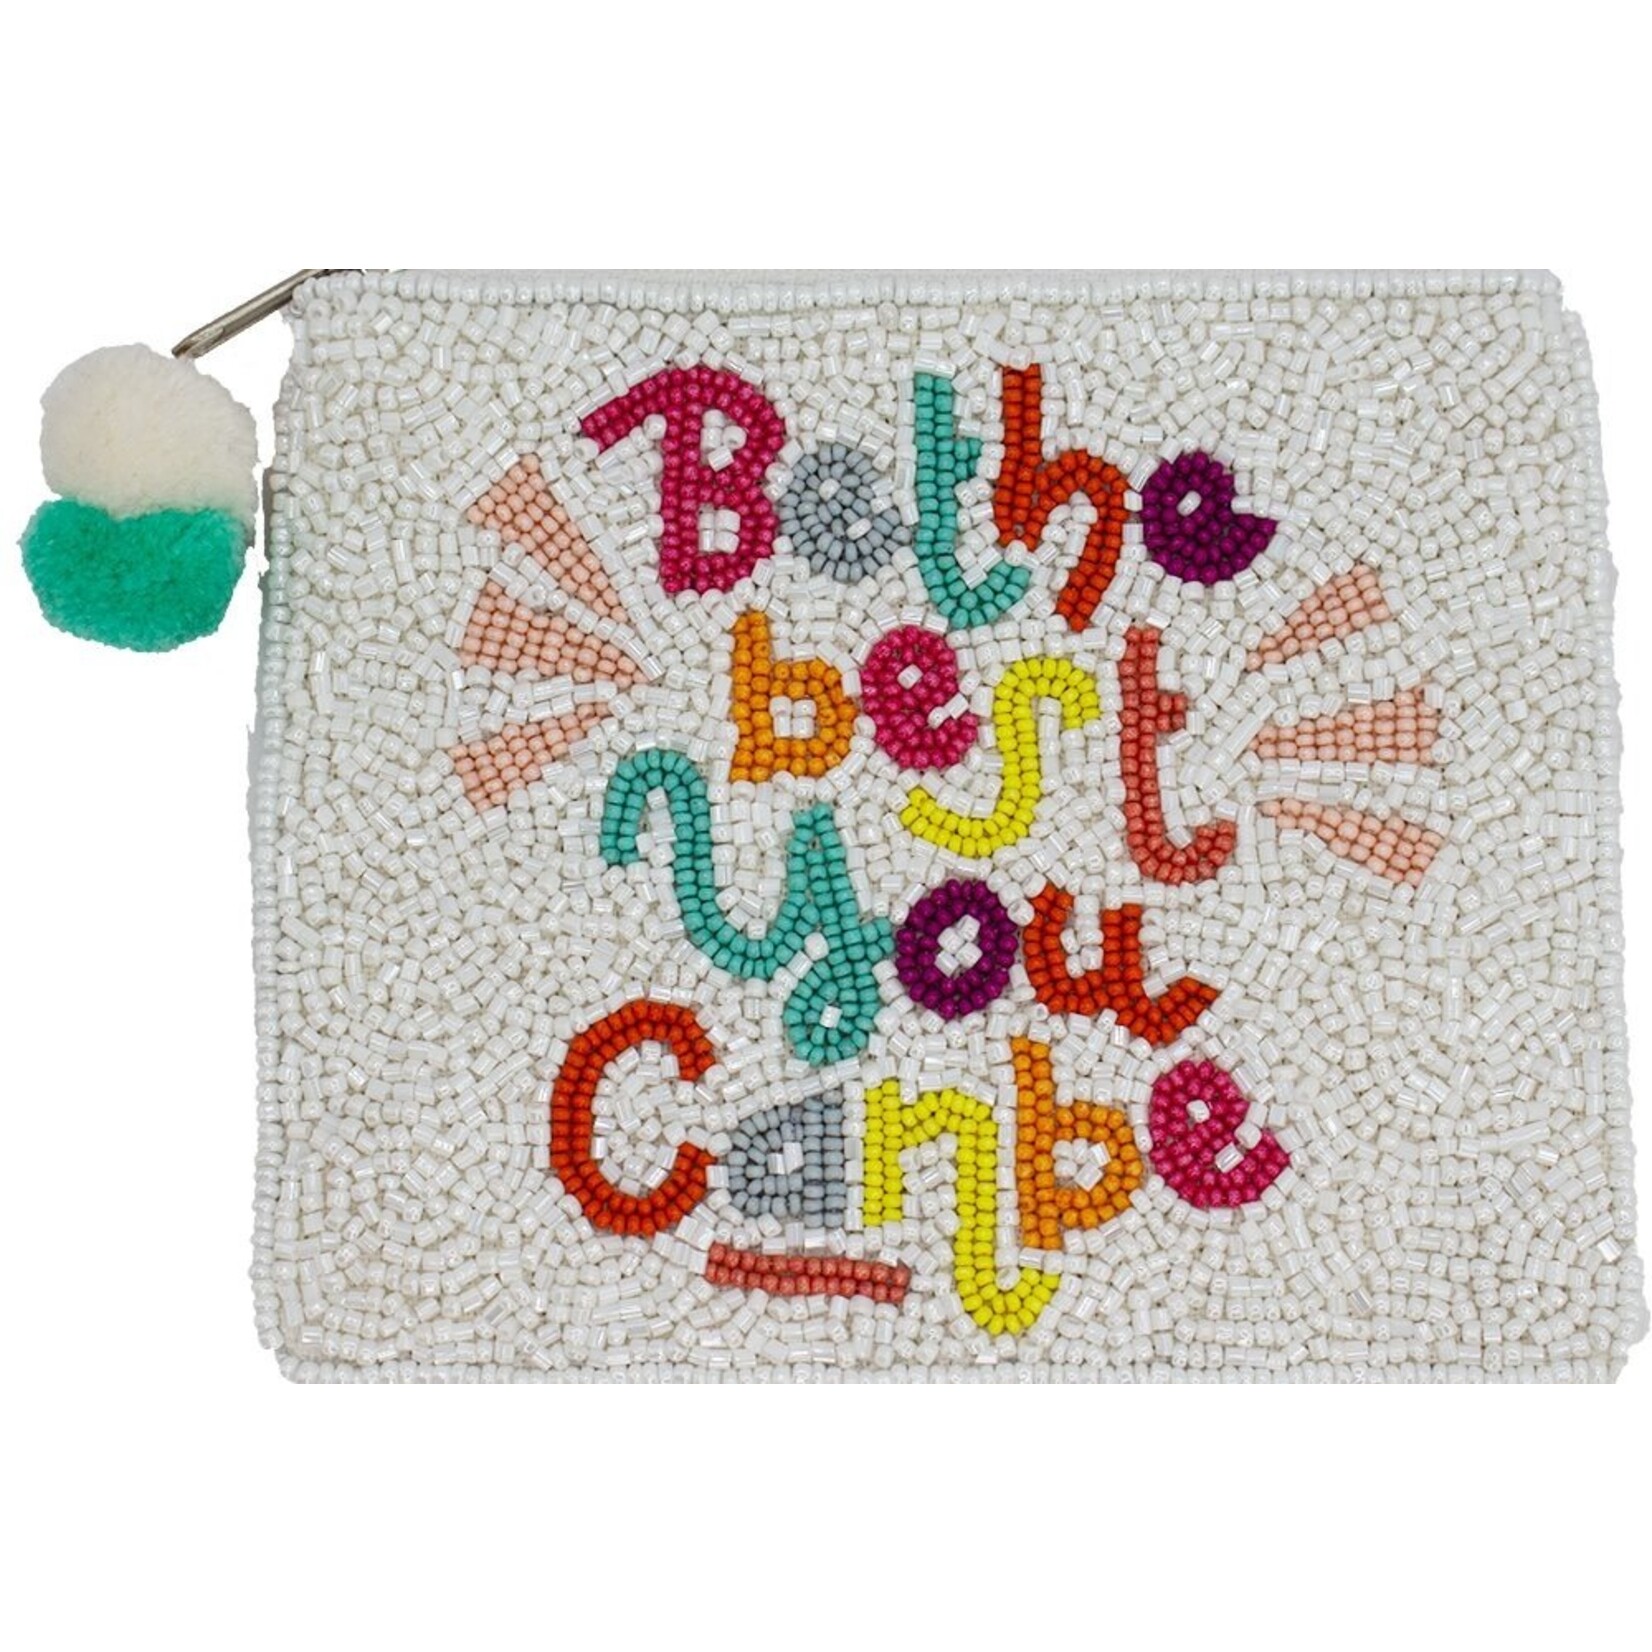 La Chic Designs Be the Best You Can Be Pouch